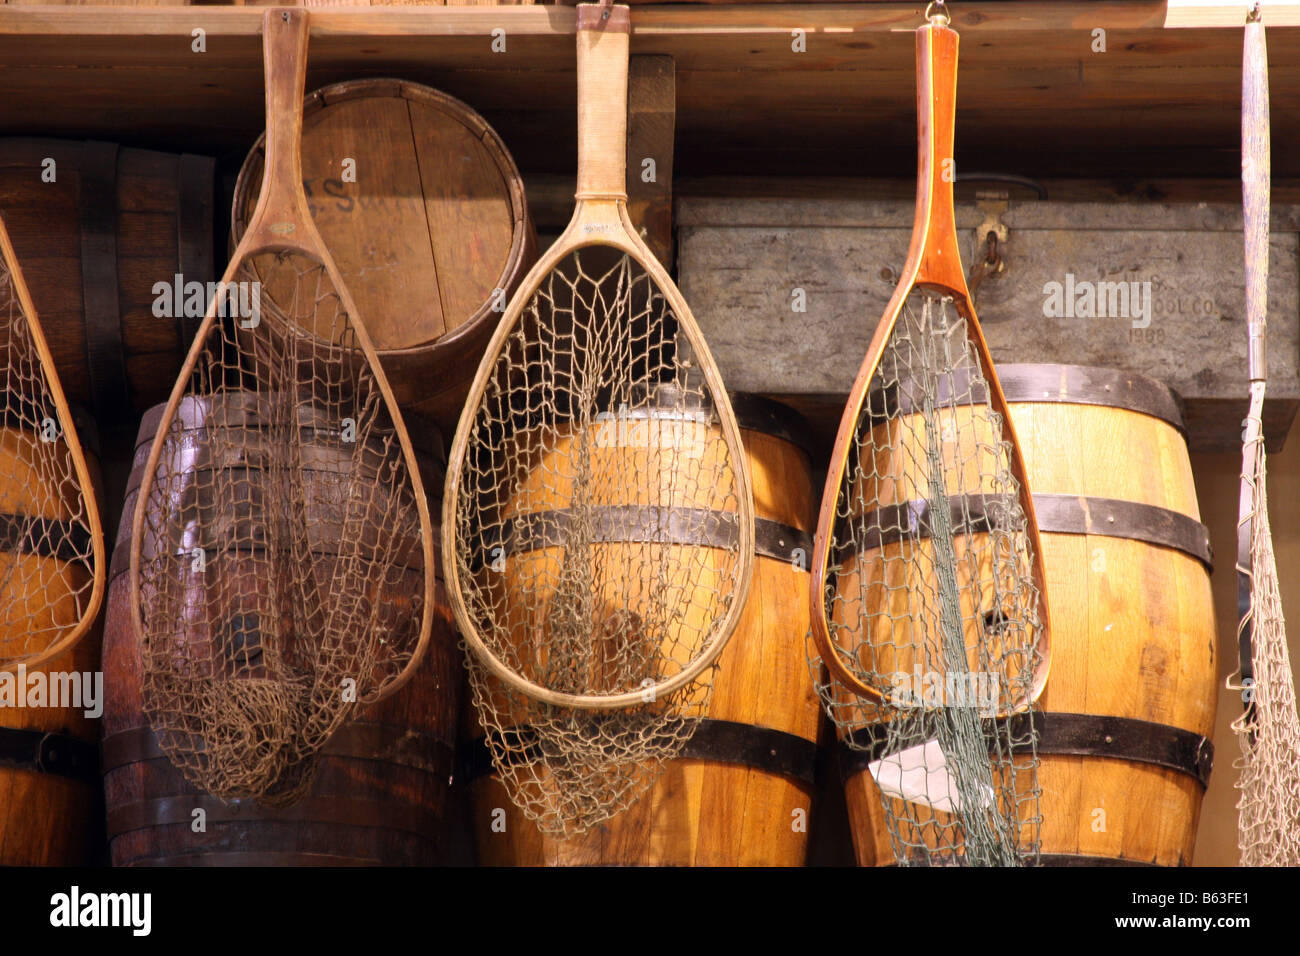 Old antique fishing equipment displayed at the Bass Pro Shop retail store  Items include fishing nets and wooden barrels Stock Photo - Alamy